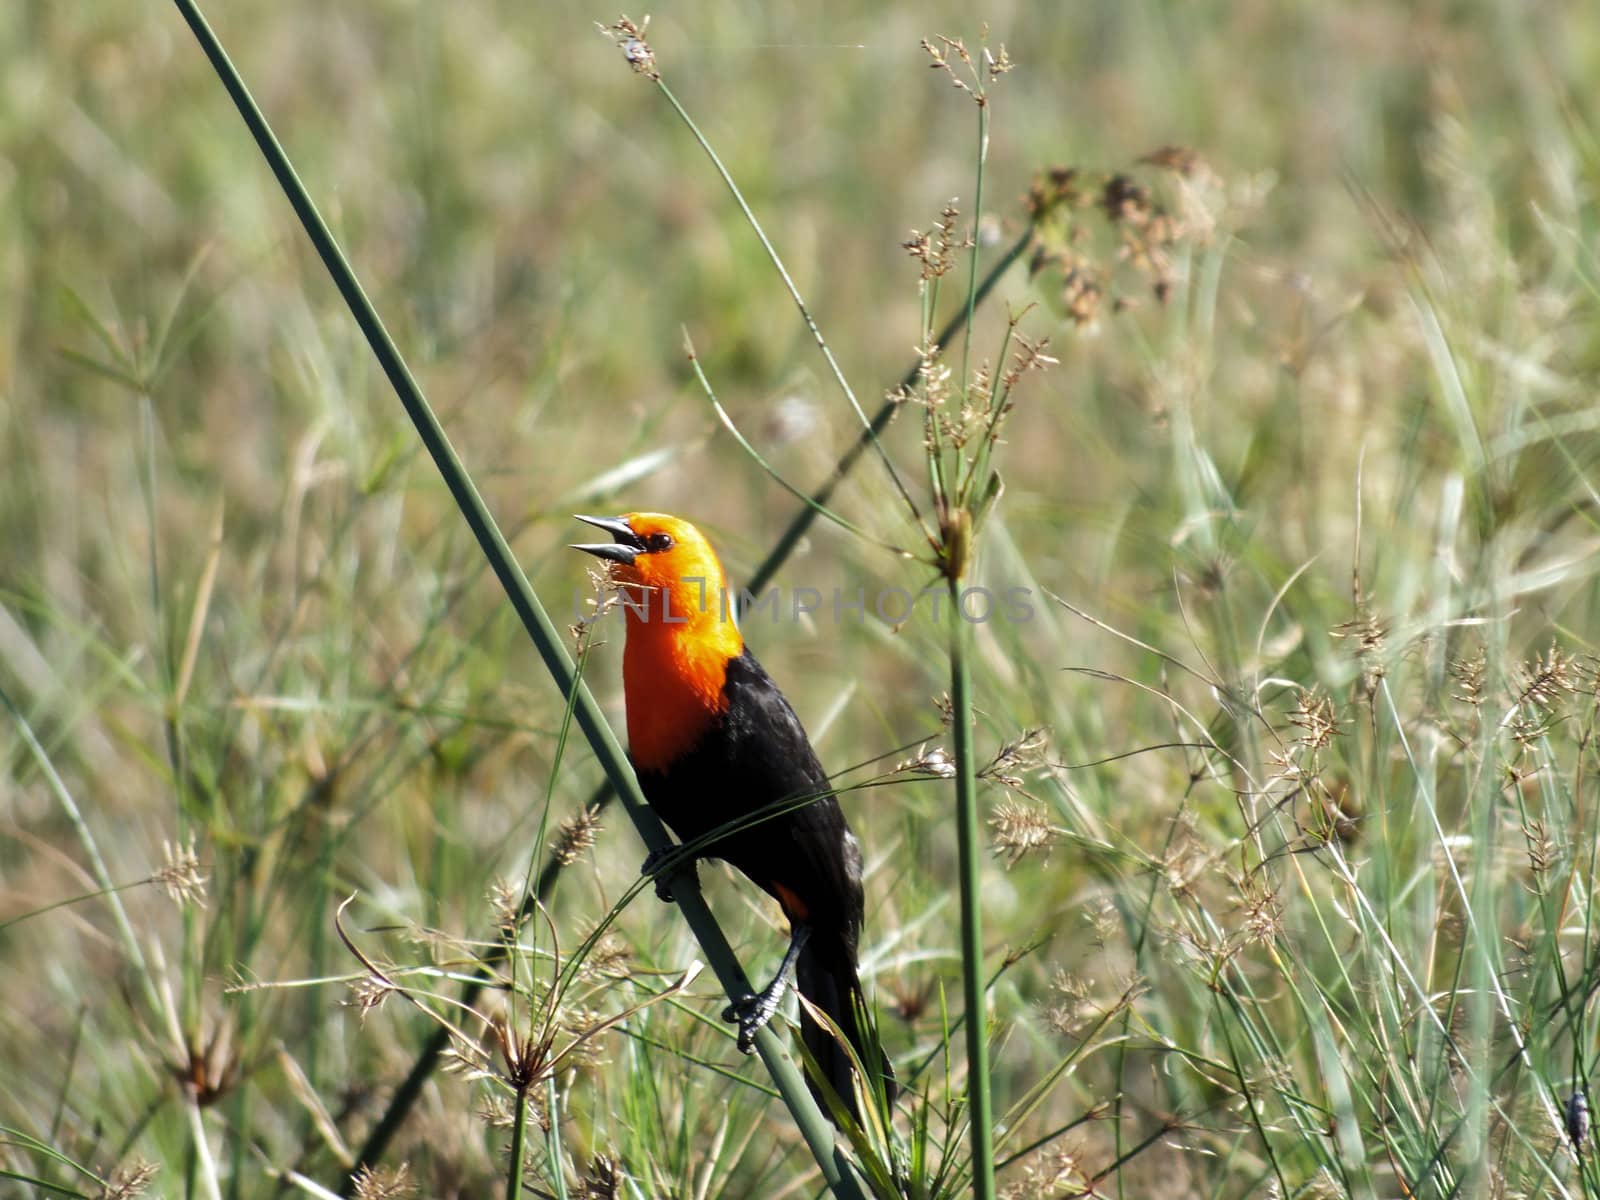 The Scarlet-headed Blackbird (Amblyramphus holosericeus) is found in large reed beds of southern South American wetlands. 